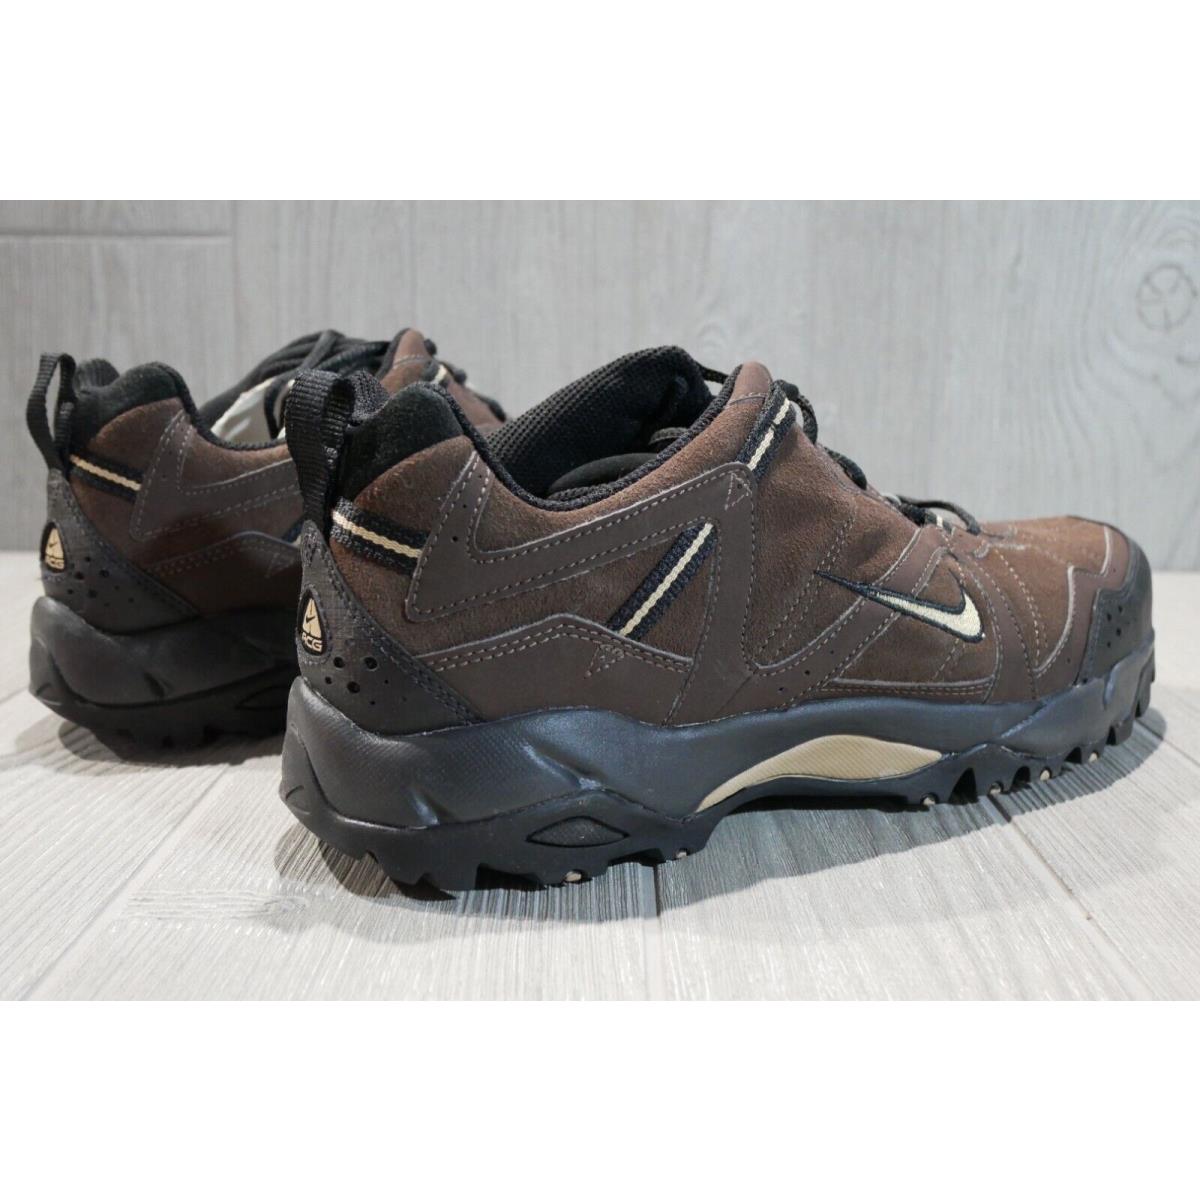 Nike shoes Bandolier - Brown 4